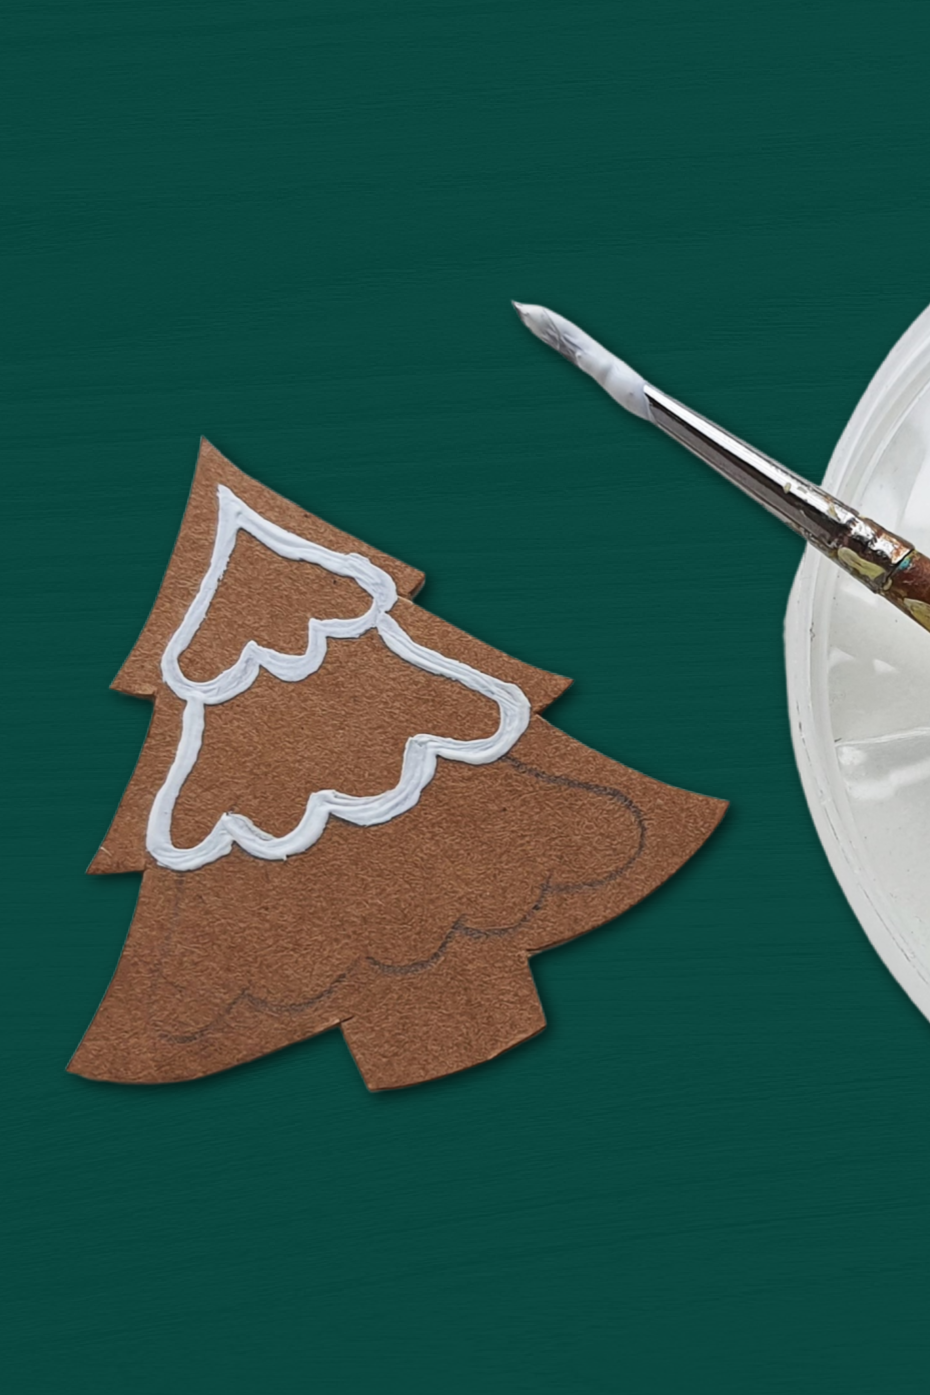 partially painted paper gingerbread tree ornament on a green background